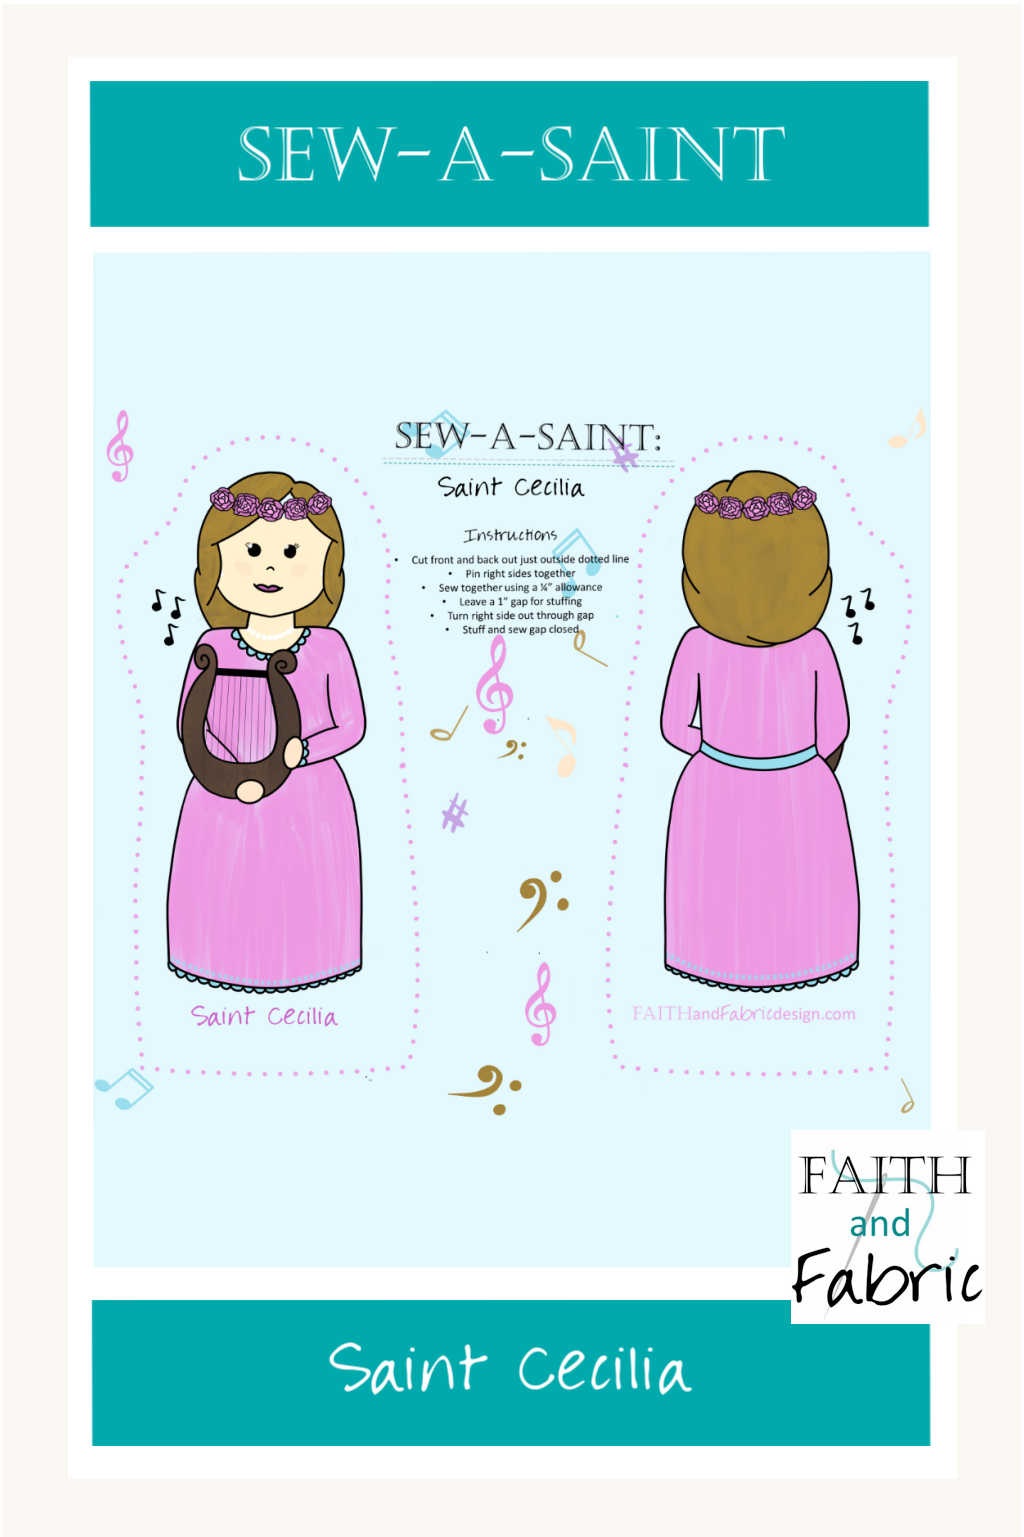 Sew your own Saint Cecilia doll with this Sew-a-Saint fabric!